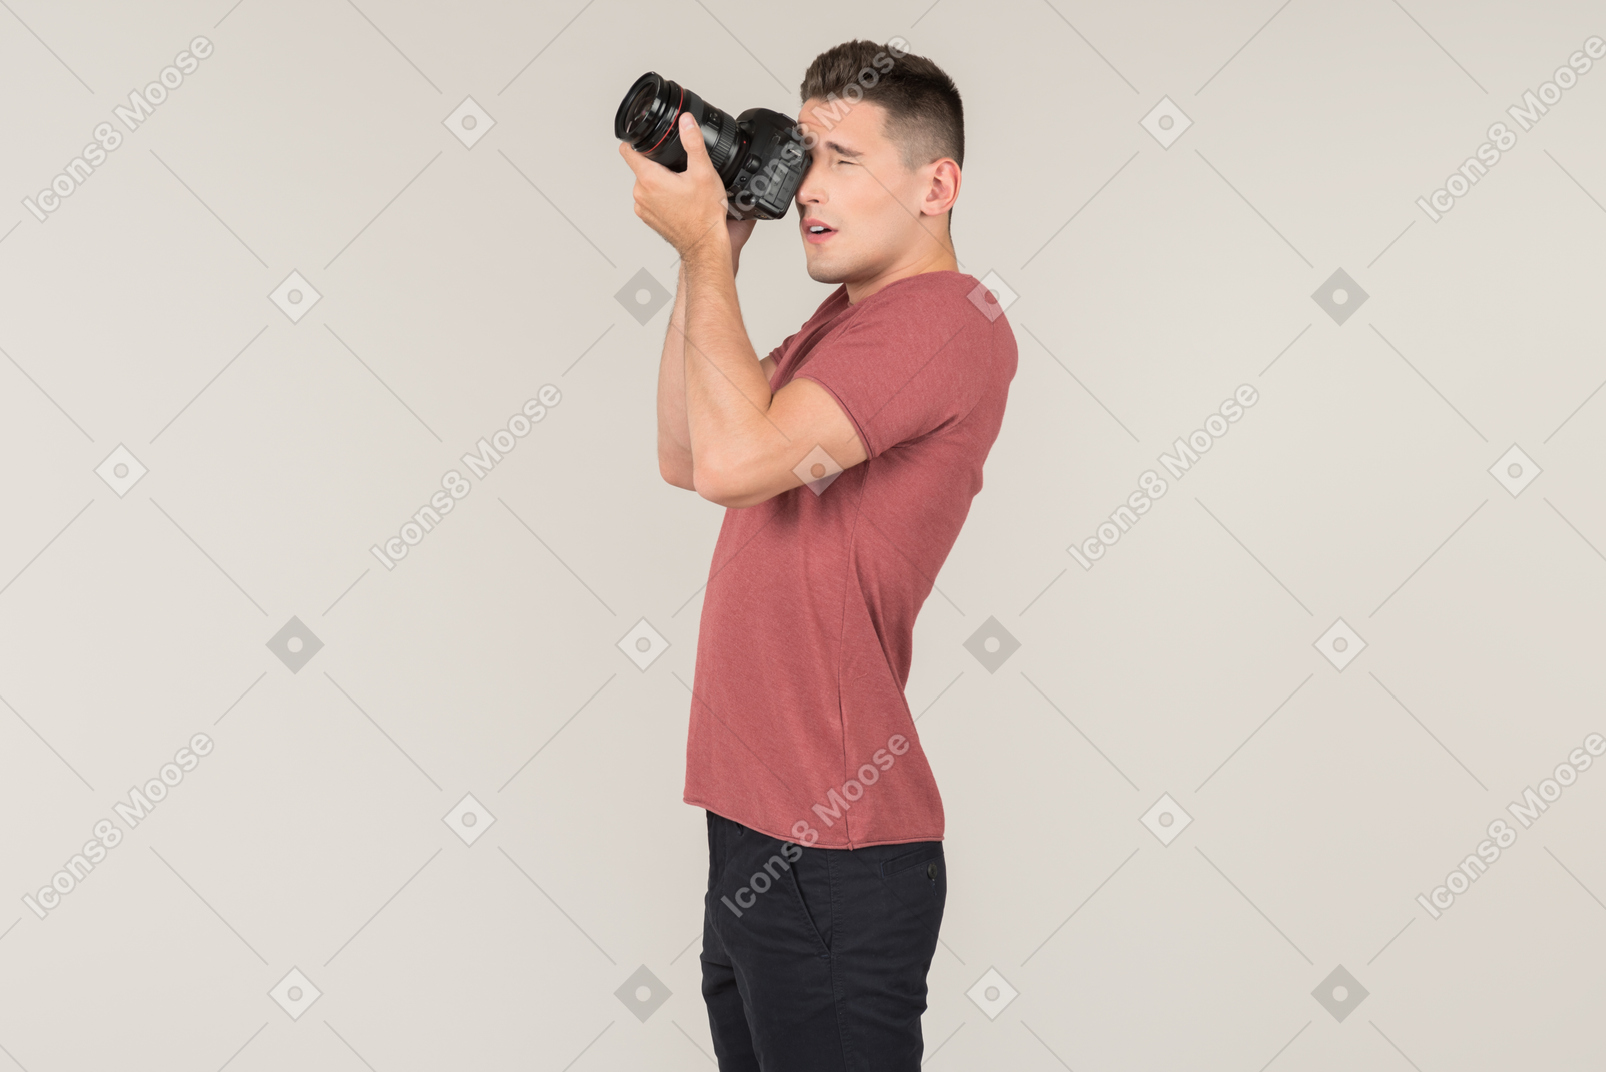 Young guy taking photos with a camera